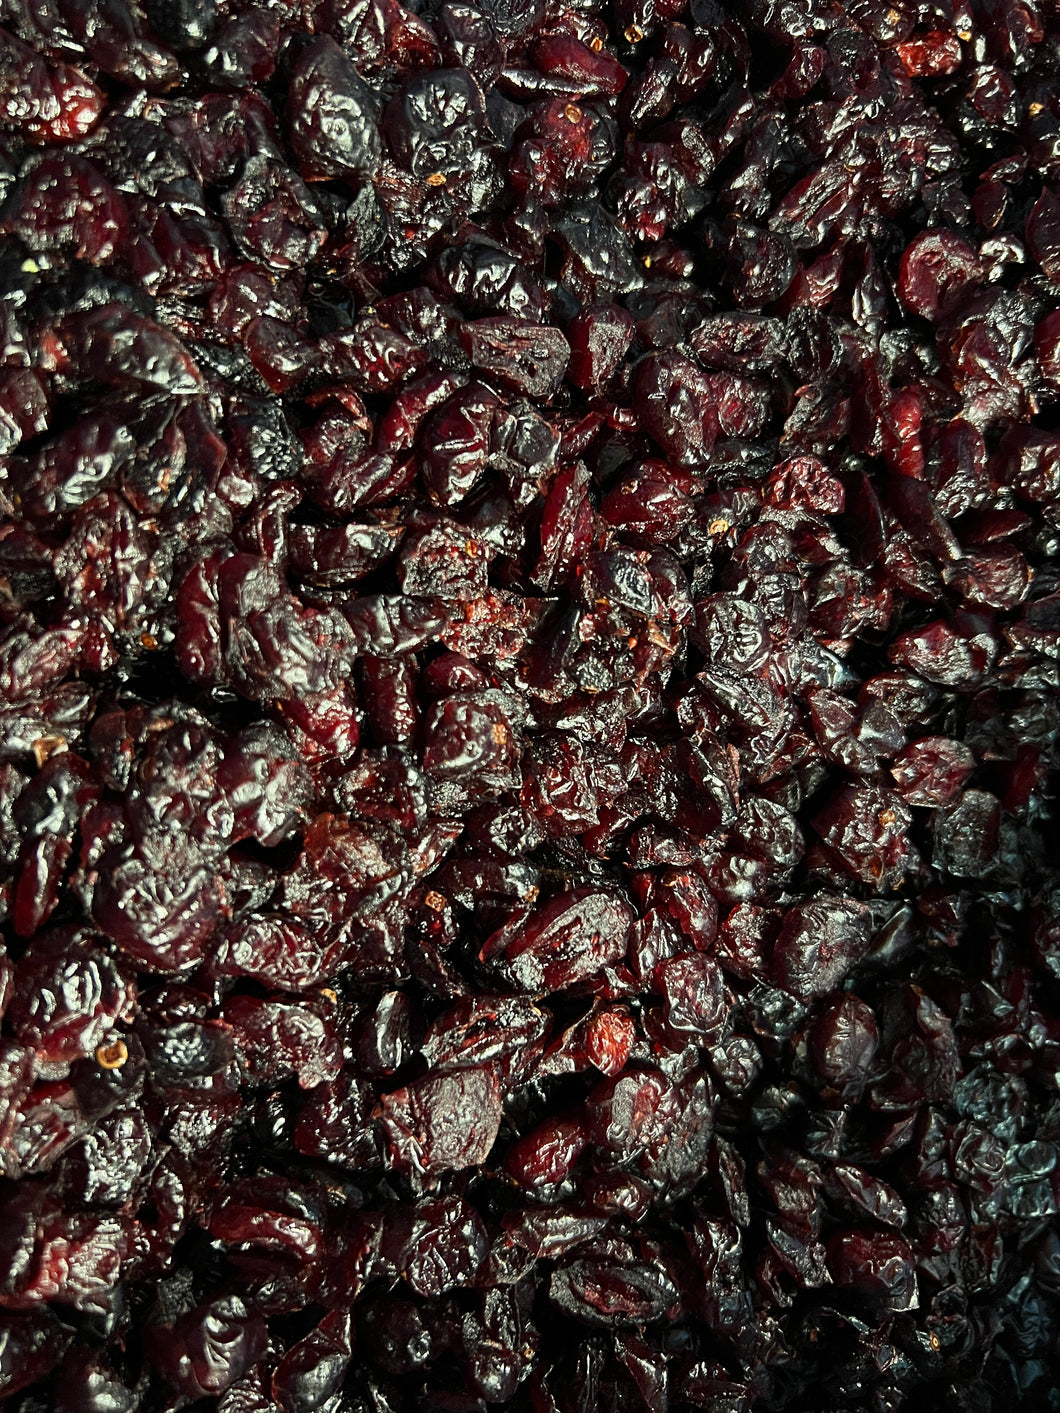 Dried Cranberries - Sweet & Soft